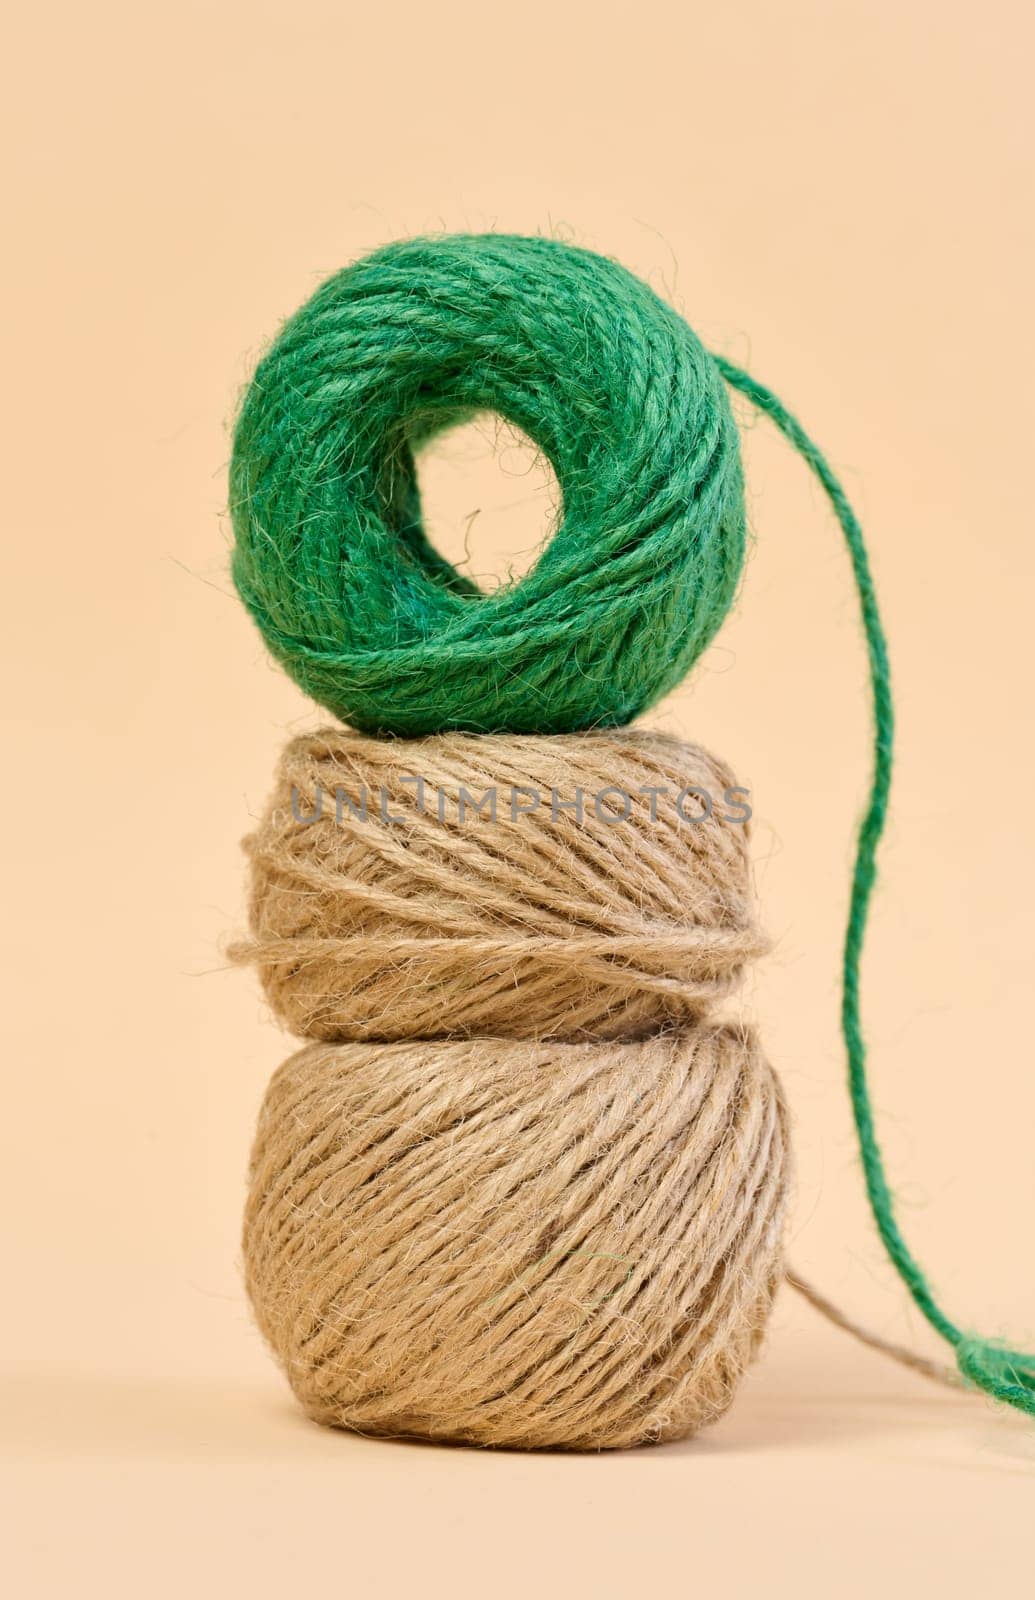 Skein of green and brown thread on a beige background by ndanko